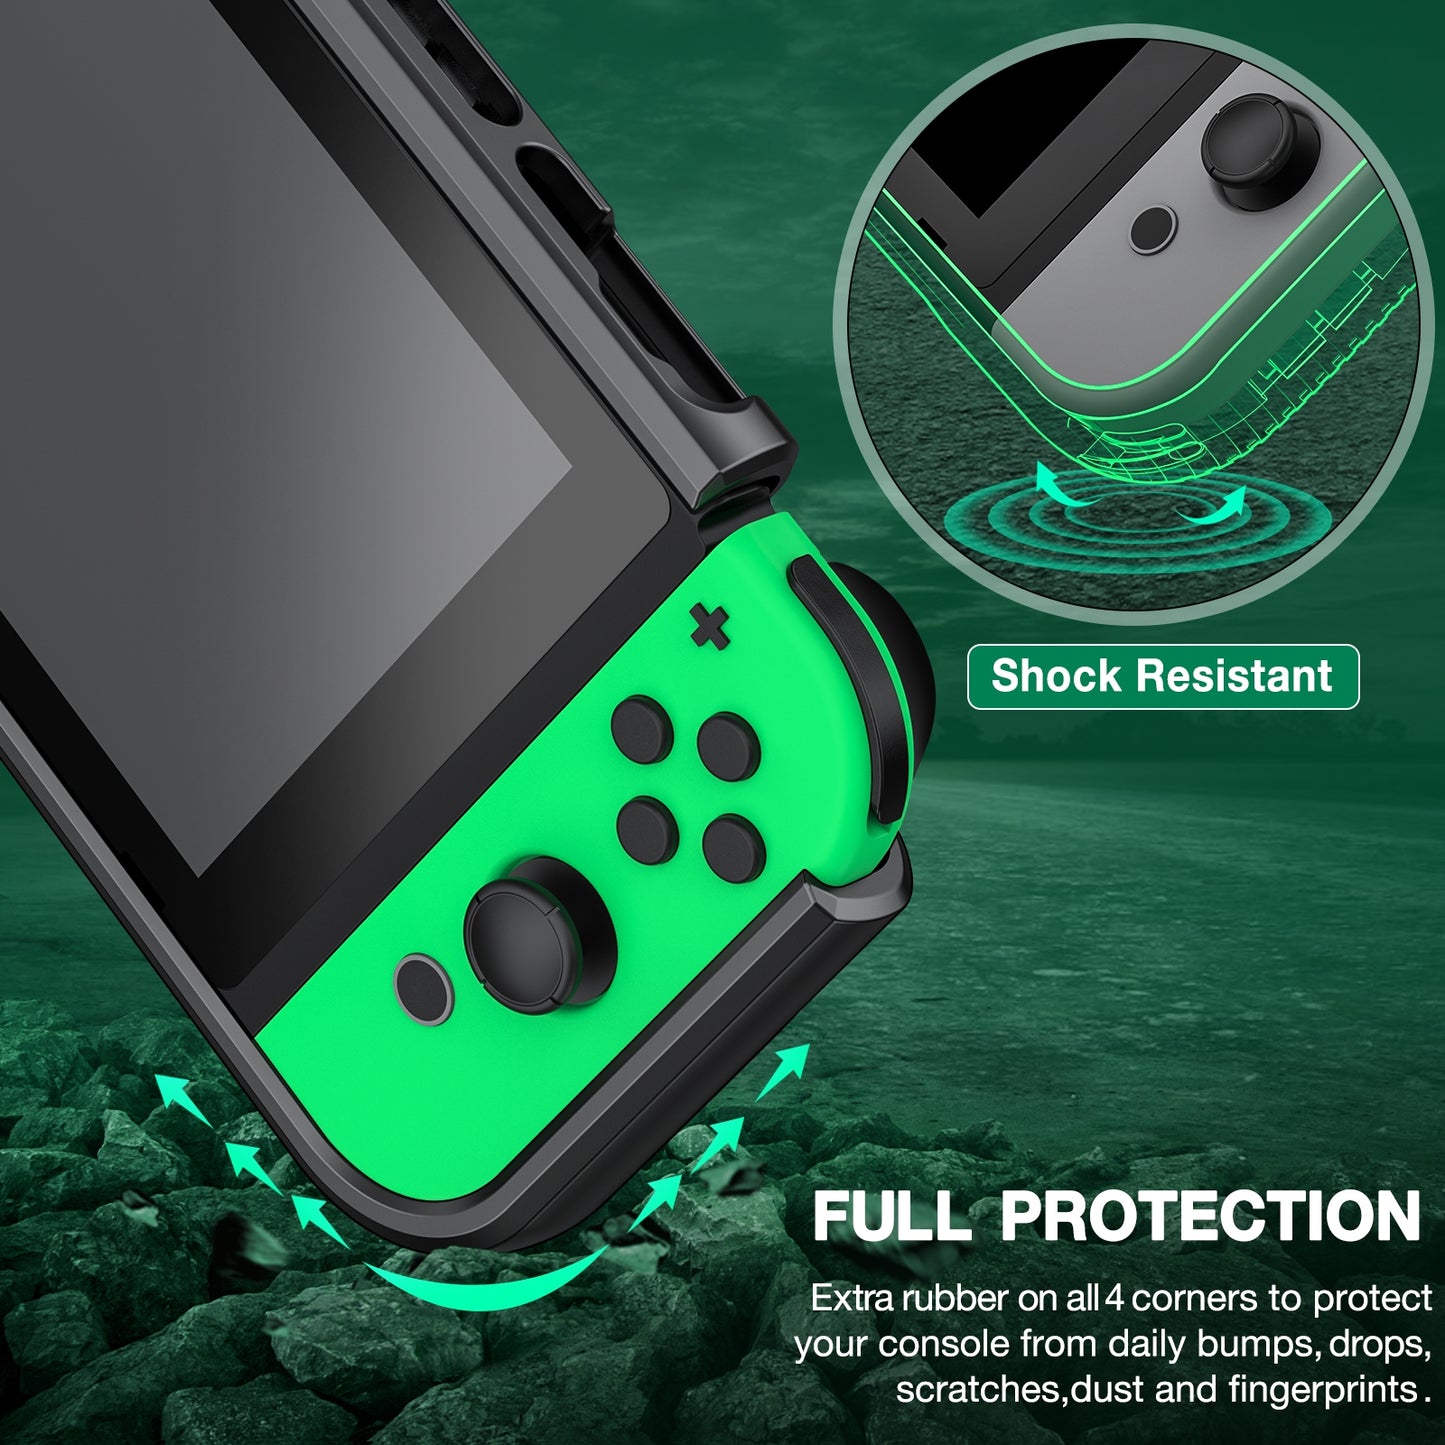 Protective Cover For Nintendo Switch with 7 storage slots